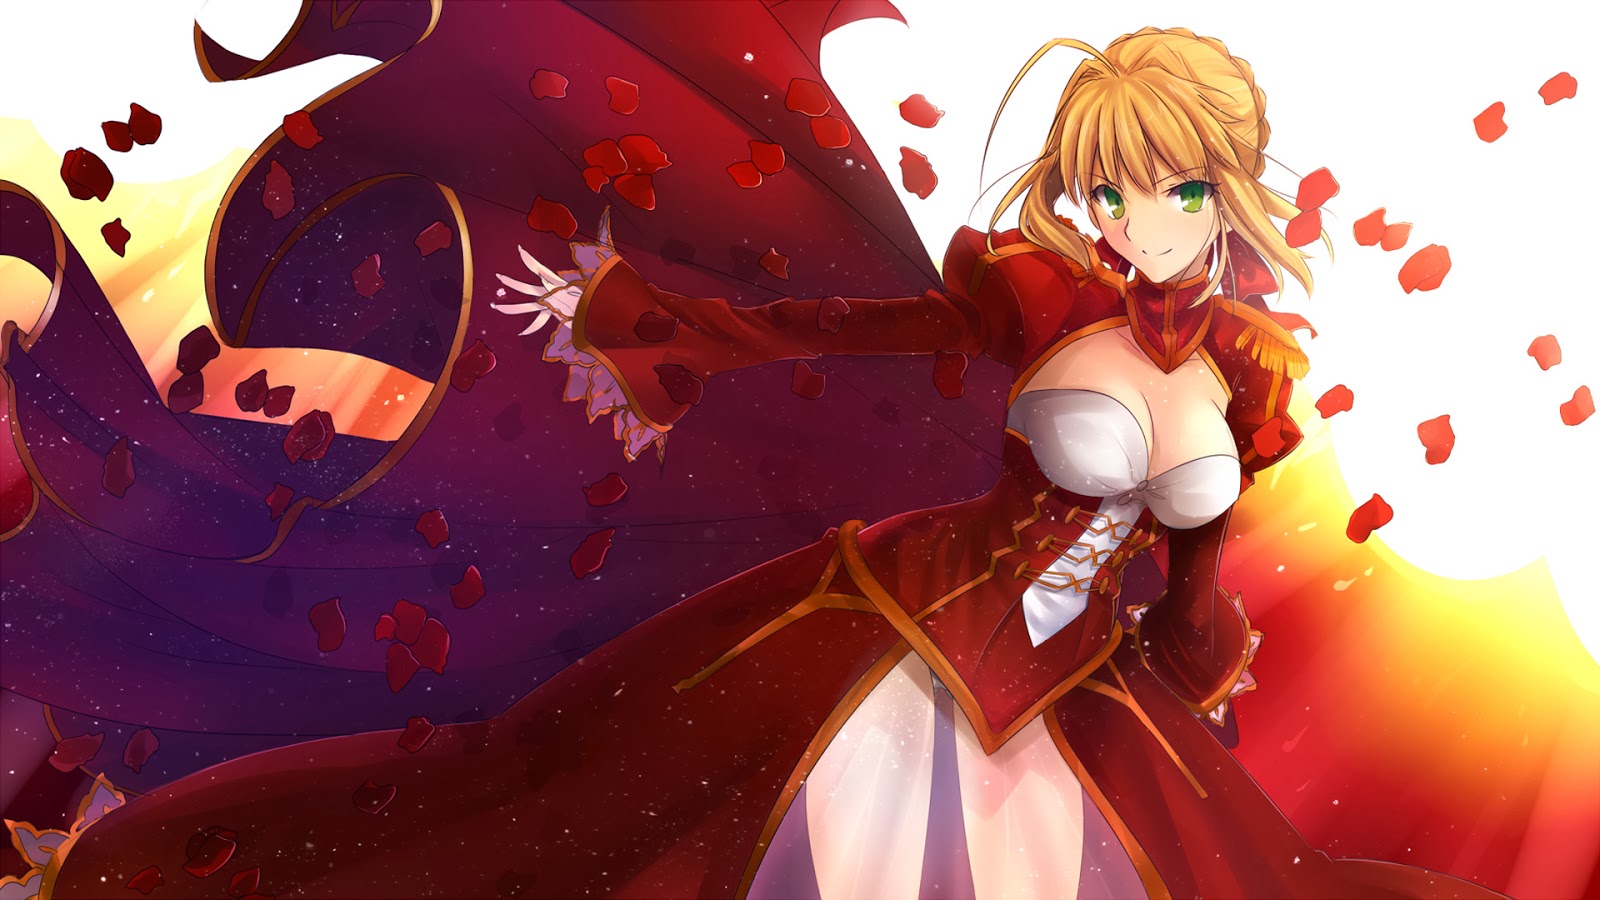 Saber Red Fate Stay Night Wallpaper Anime Blonde A797